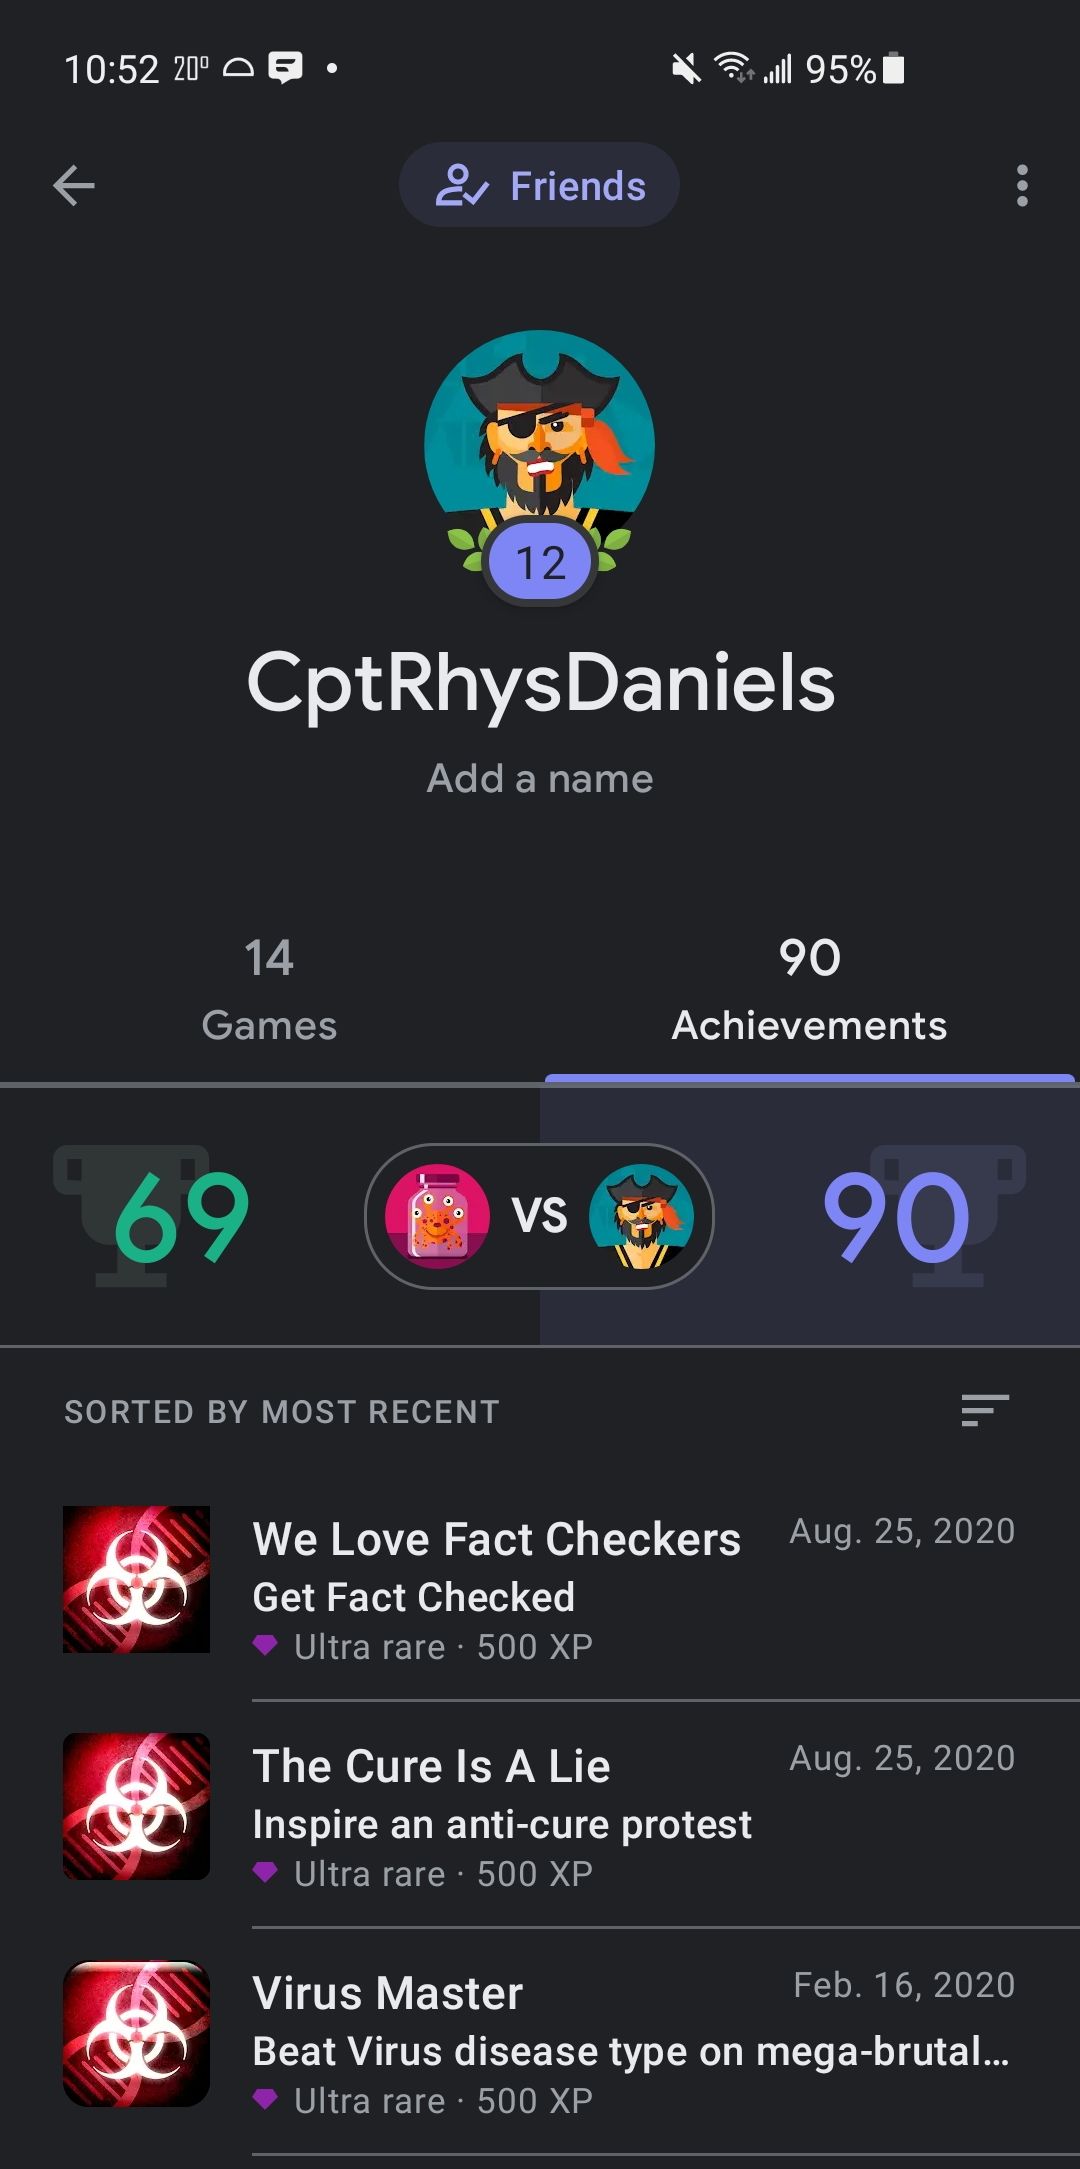 Google Play Games displaying two profiles' level and achievements side by side